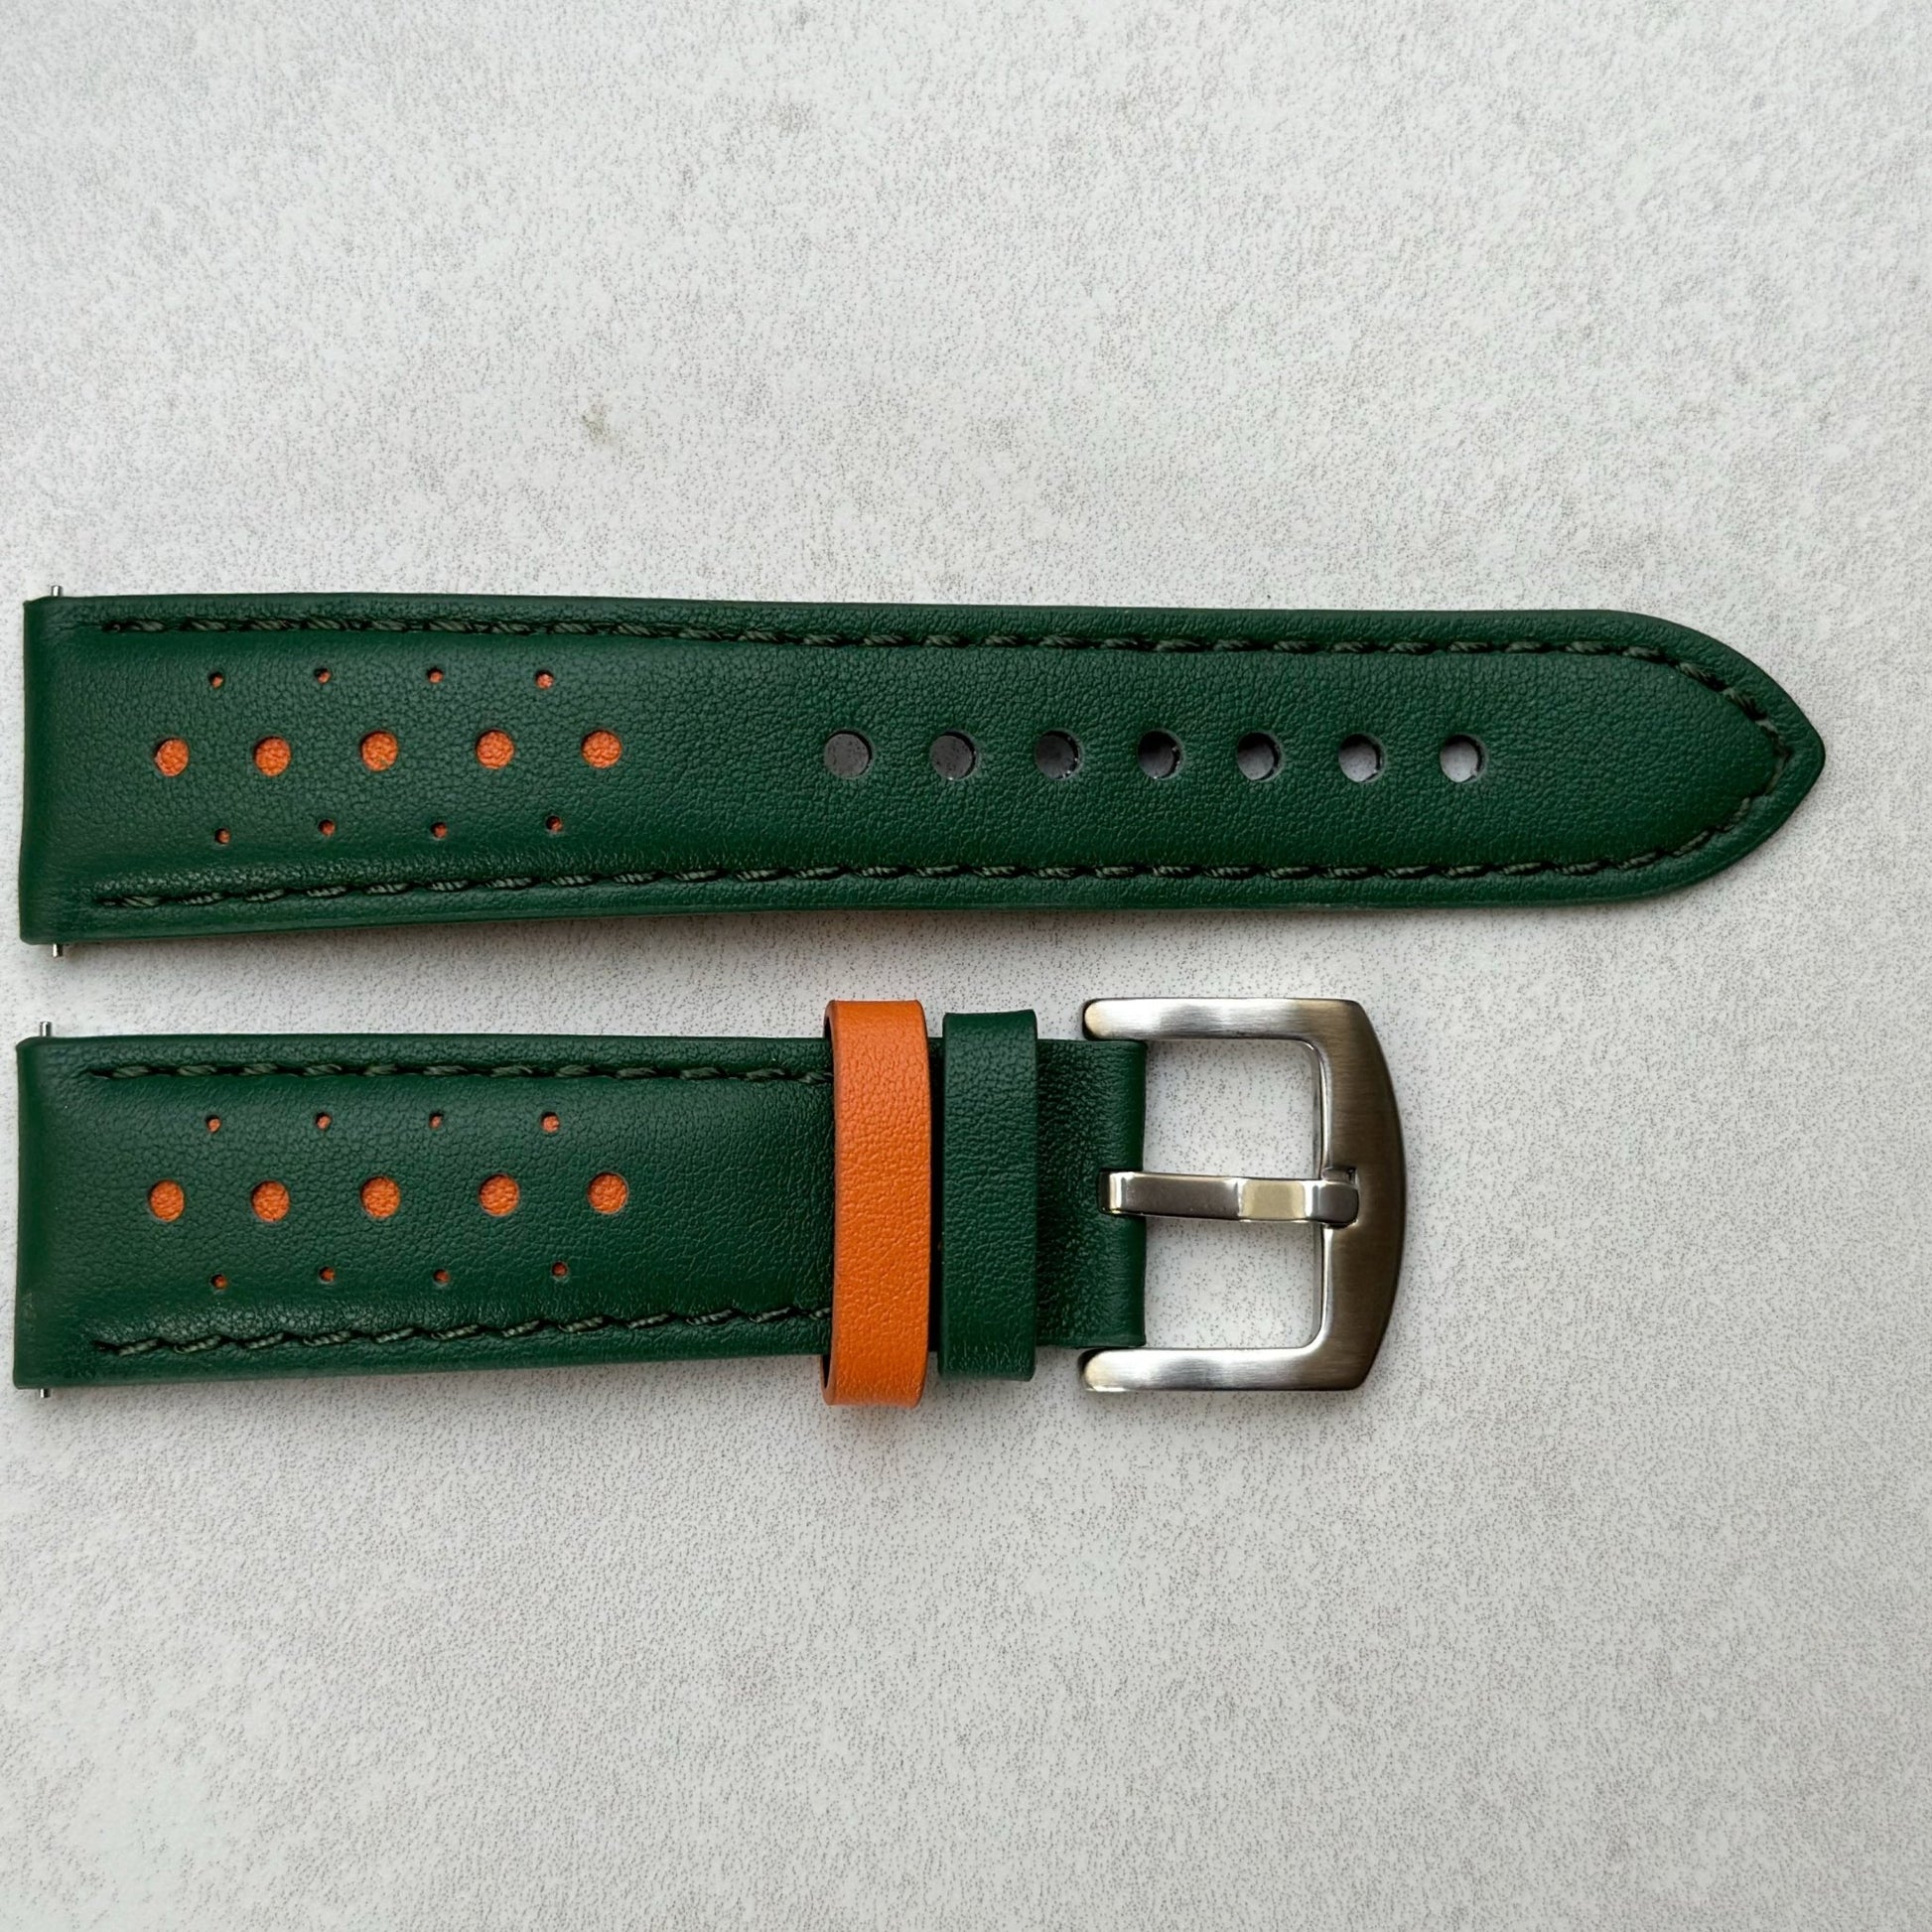 Le Mans green and orange full grain leather watch strap. Padded leather strap. 18mm, 20mm, 22mm and 24mm lug widths.